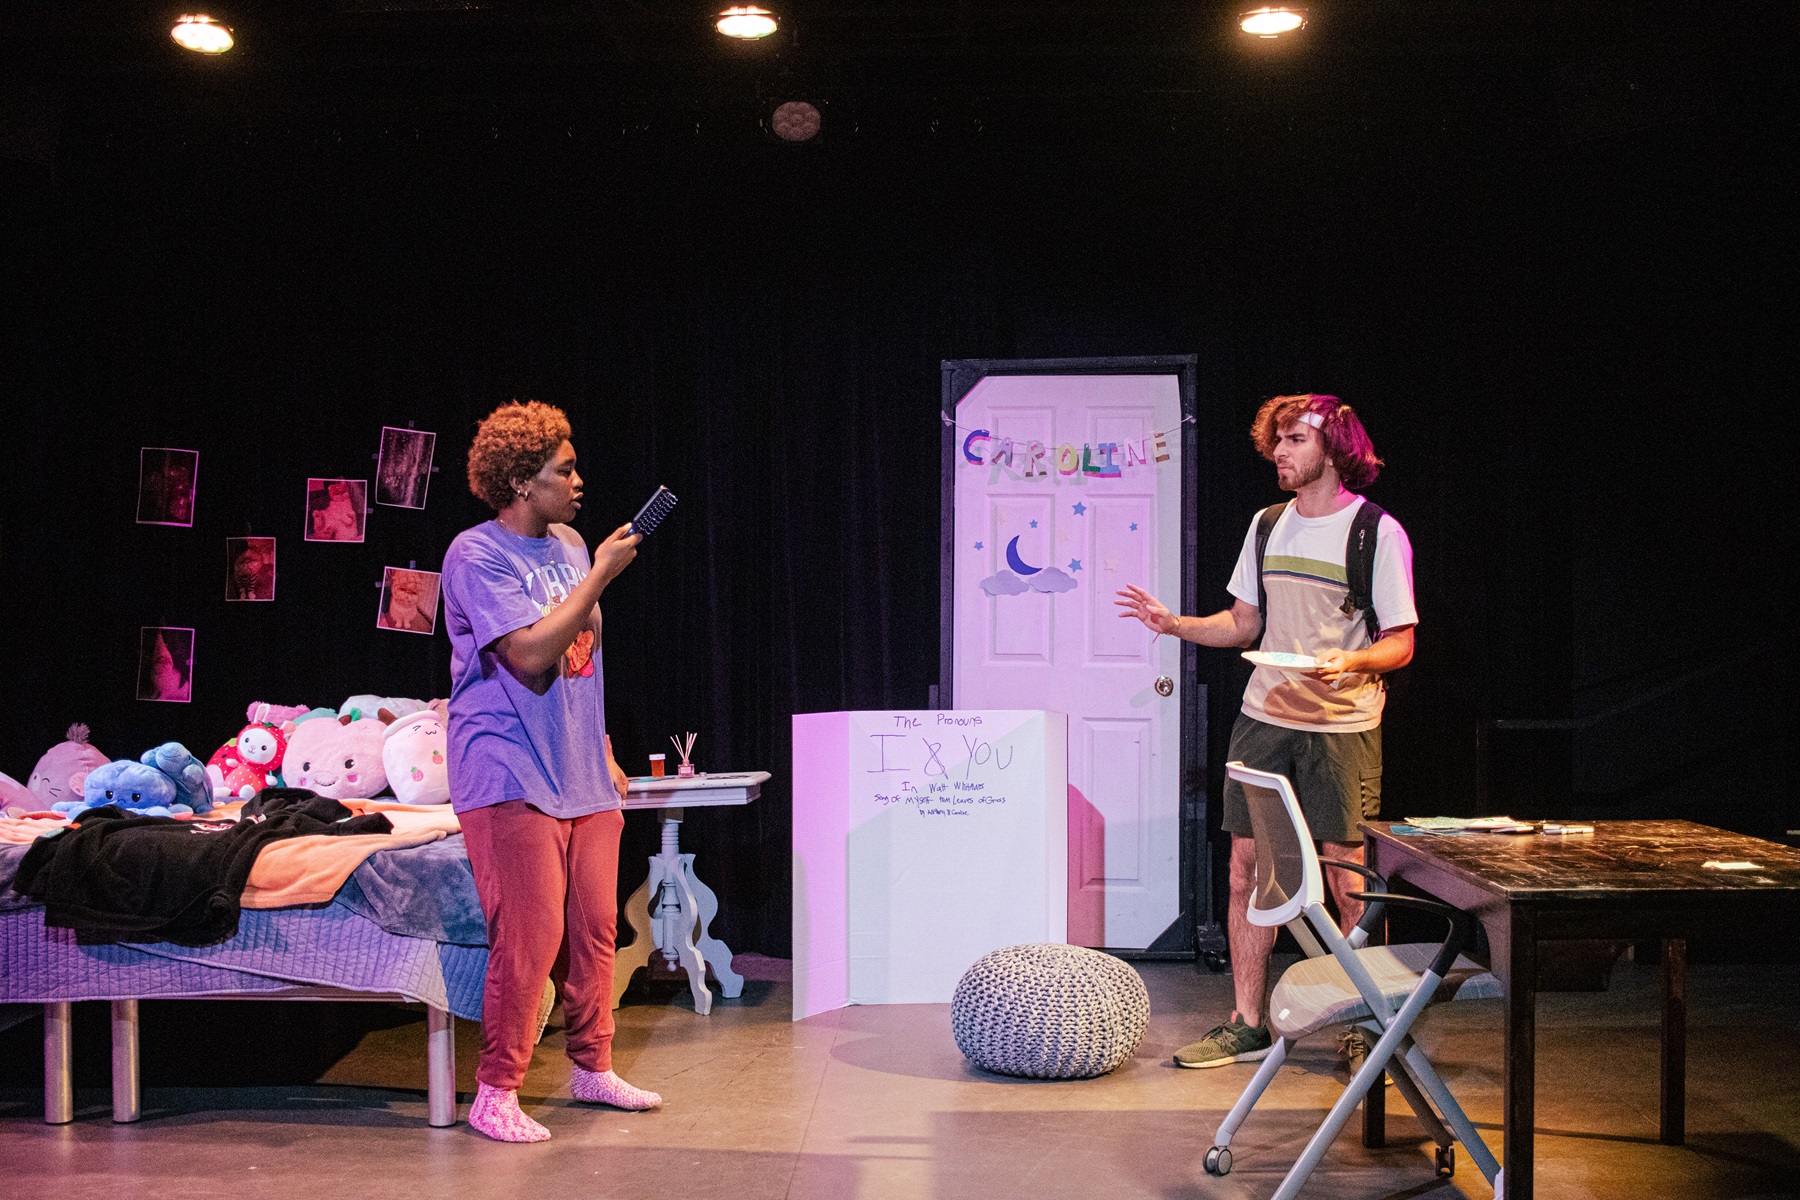 scene from production of the play I & You